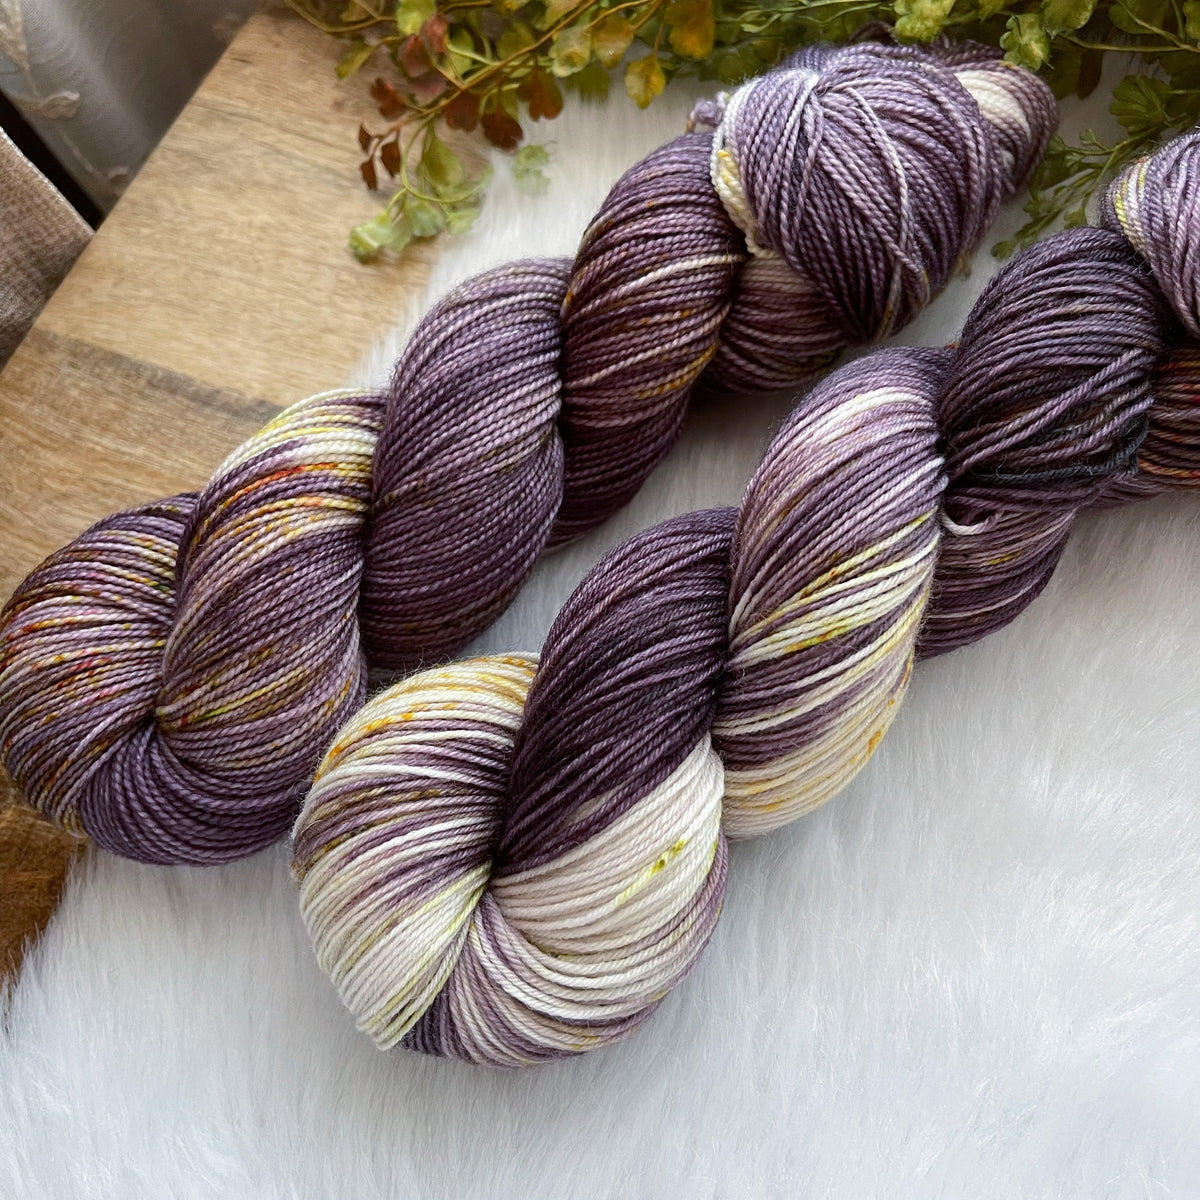 OLD FASHIONED ROMANCE -Dyed to Order - Hand Dyed Yarn Skein